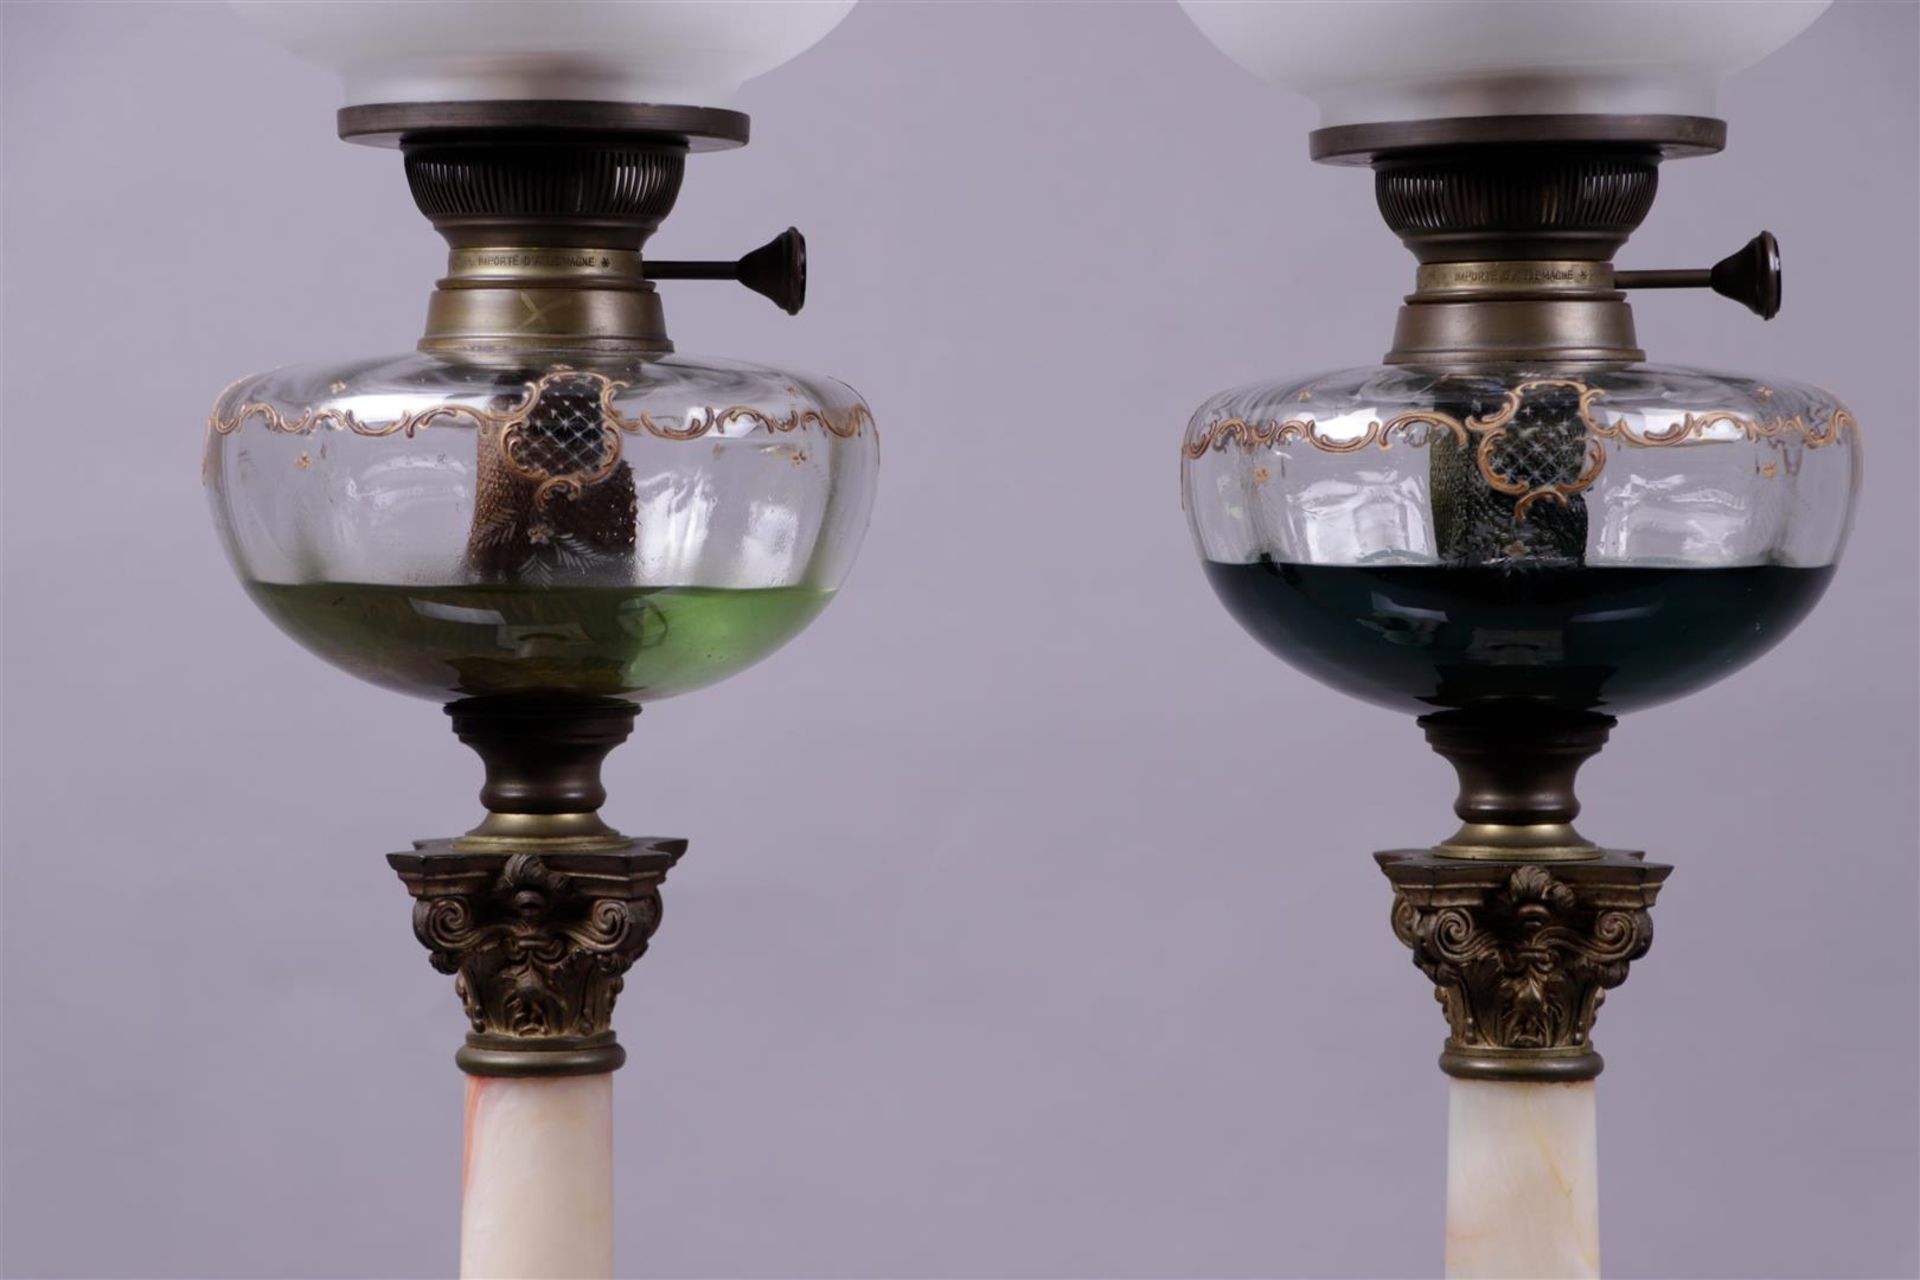 A pair of 19th century cold-painted oil lamps on white marble columns with Corinthian bronze capital - Image 2 of 2